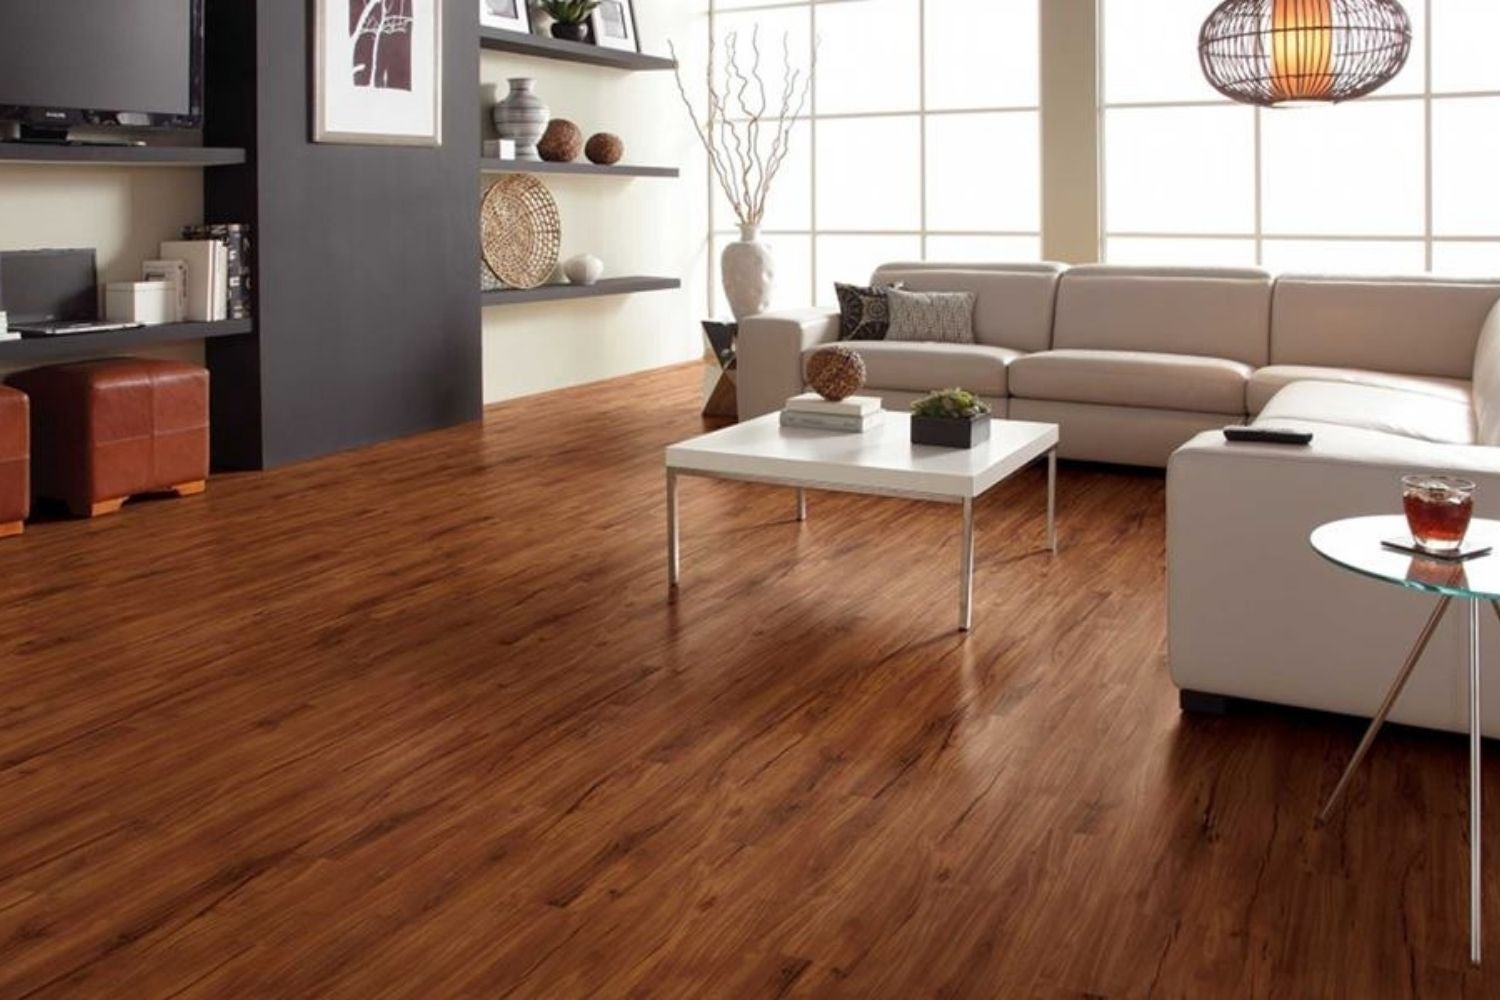 Why Choose Luxury Vinyl Flooring for Your Home?